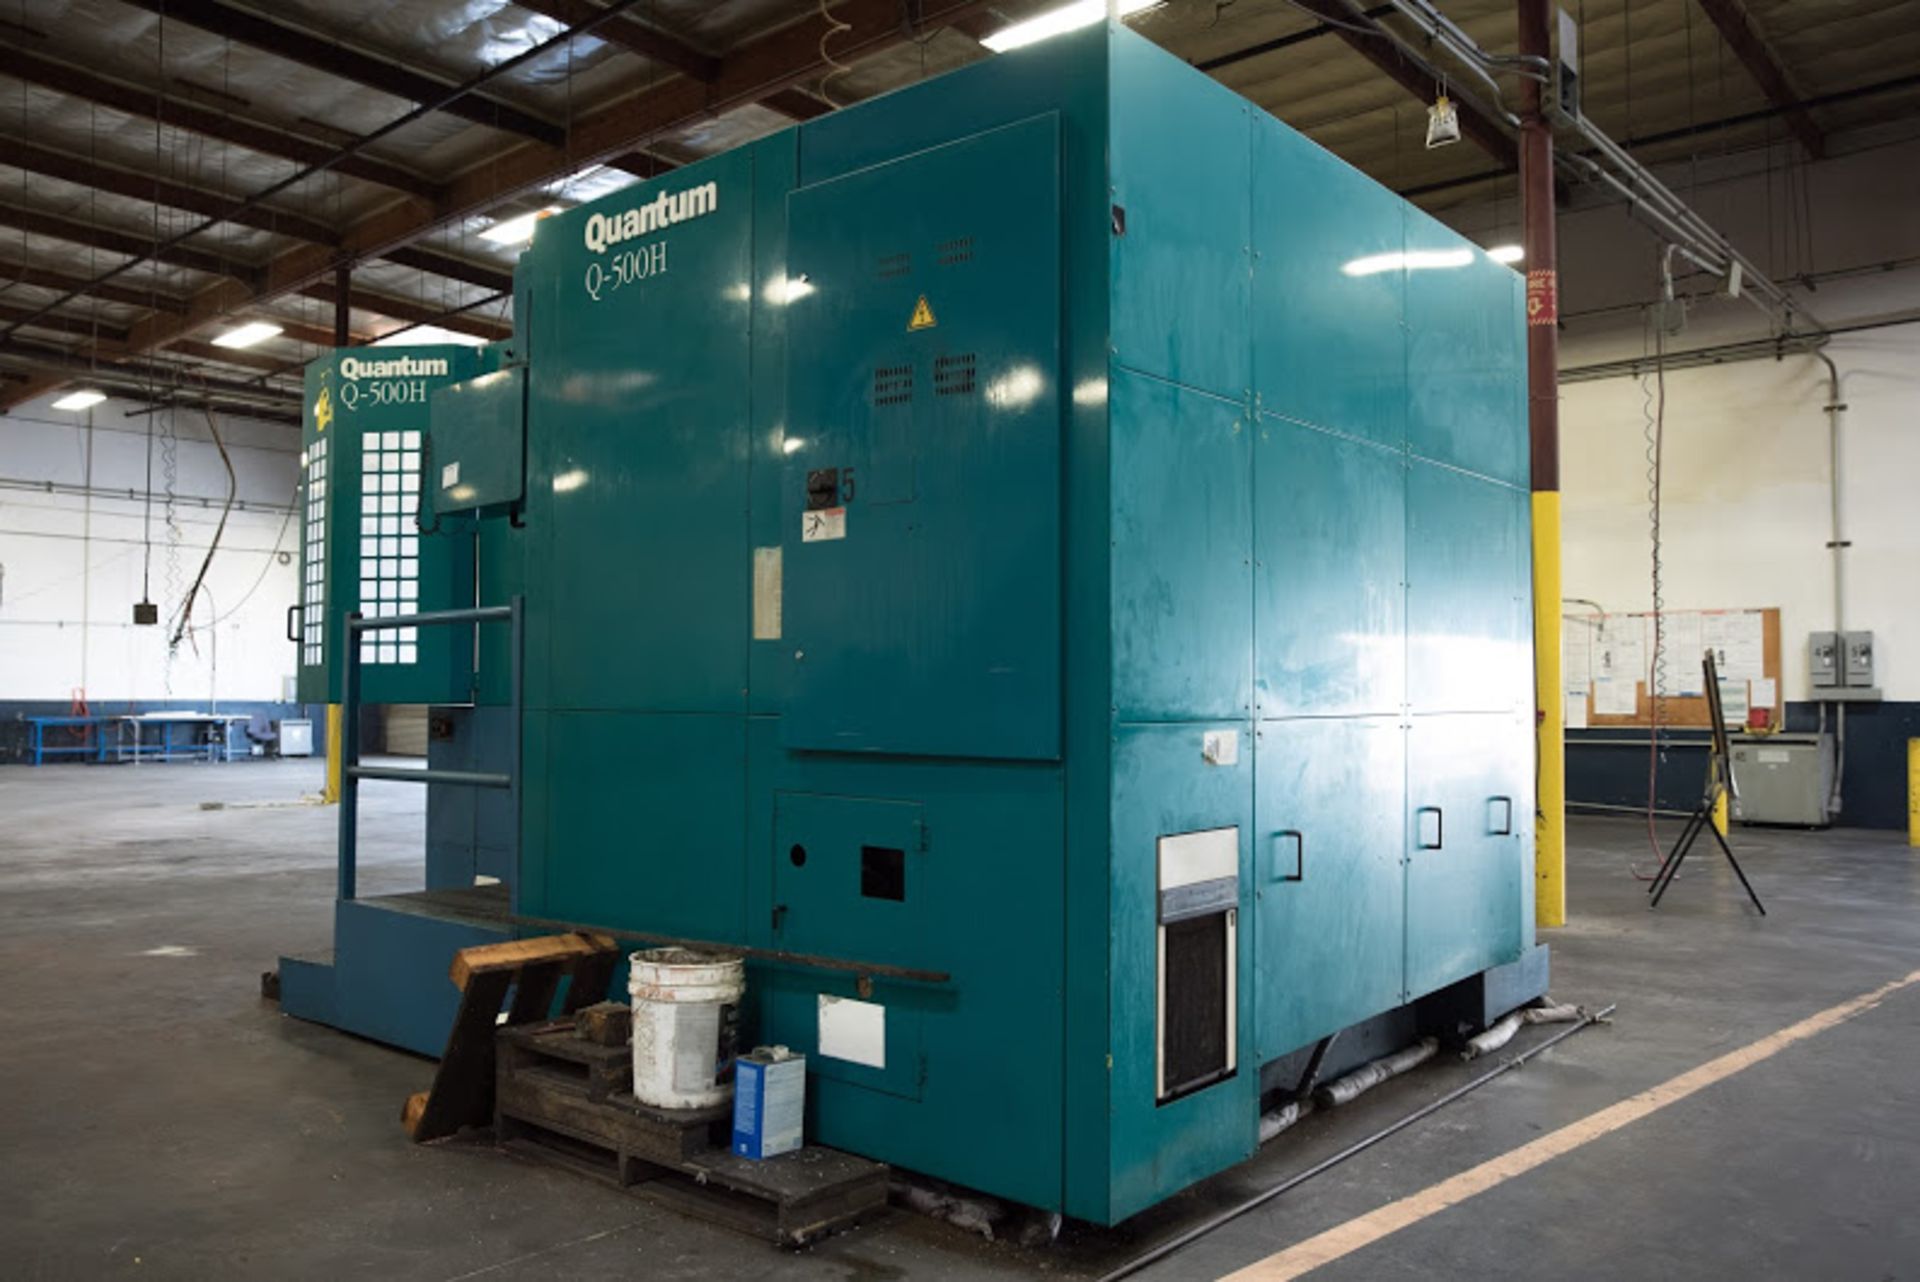 30" x 30" x 25" Travels Kasuga Quantum CNC 4 Axis Horizontal Machining Center - Located In: - Image 19 of 25